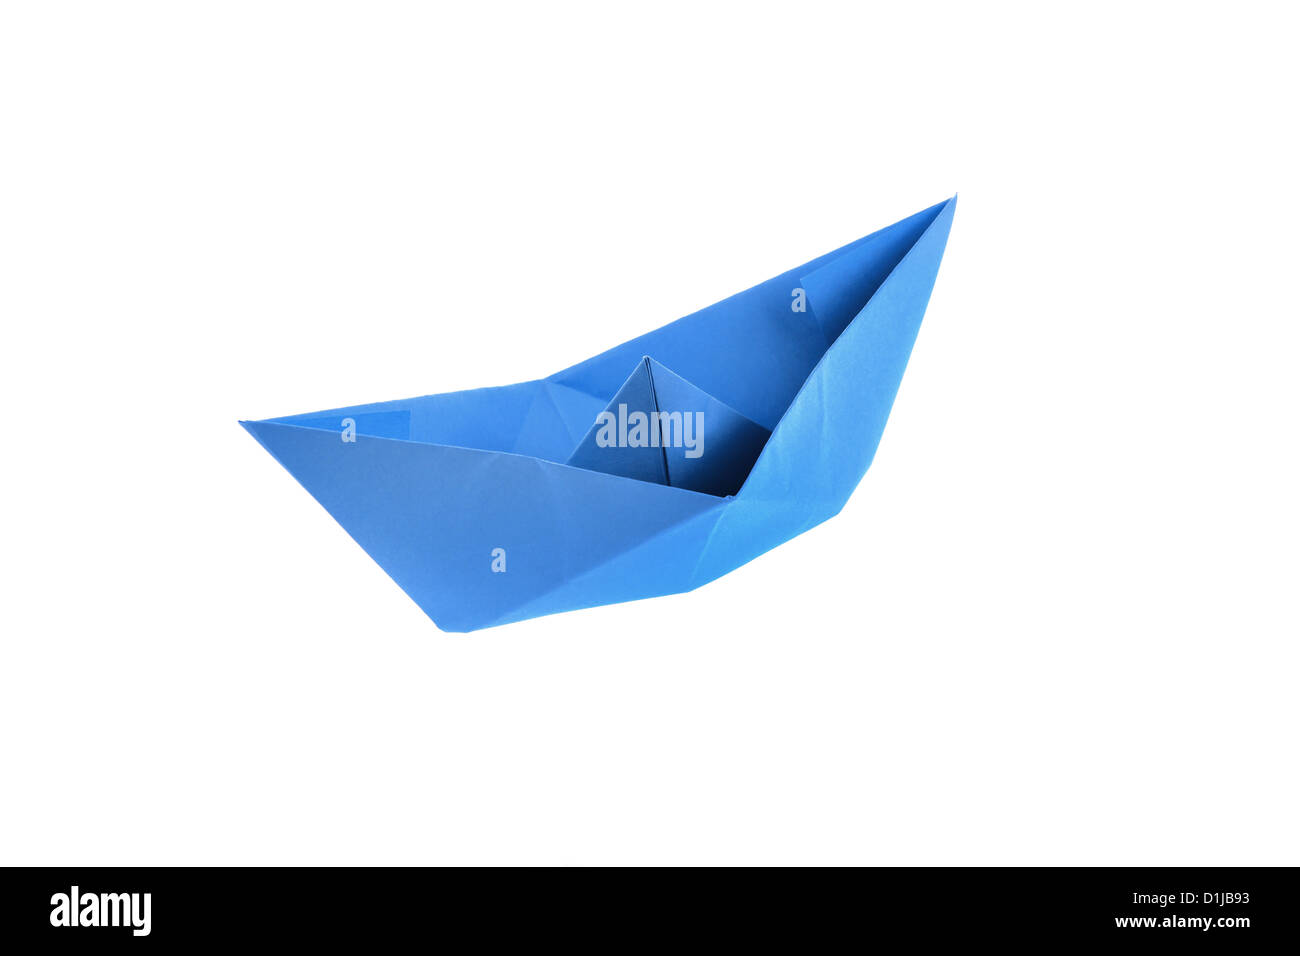 Blue origami paper boat isolated on white Stock Photo